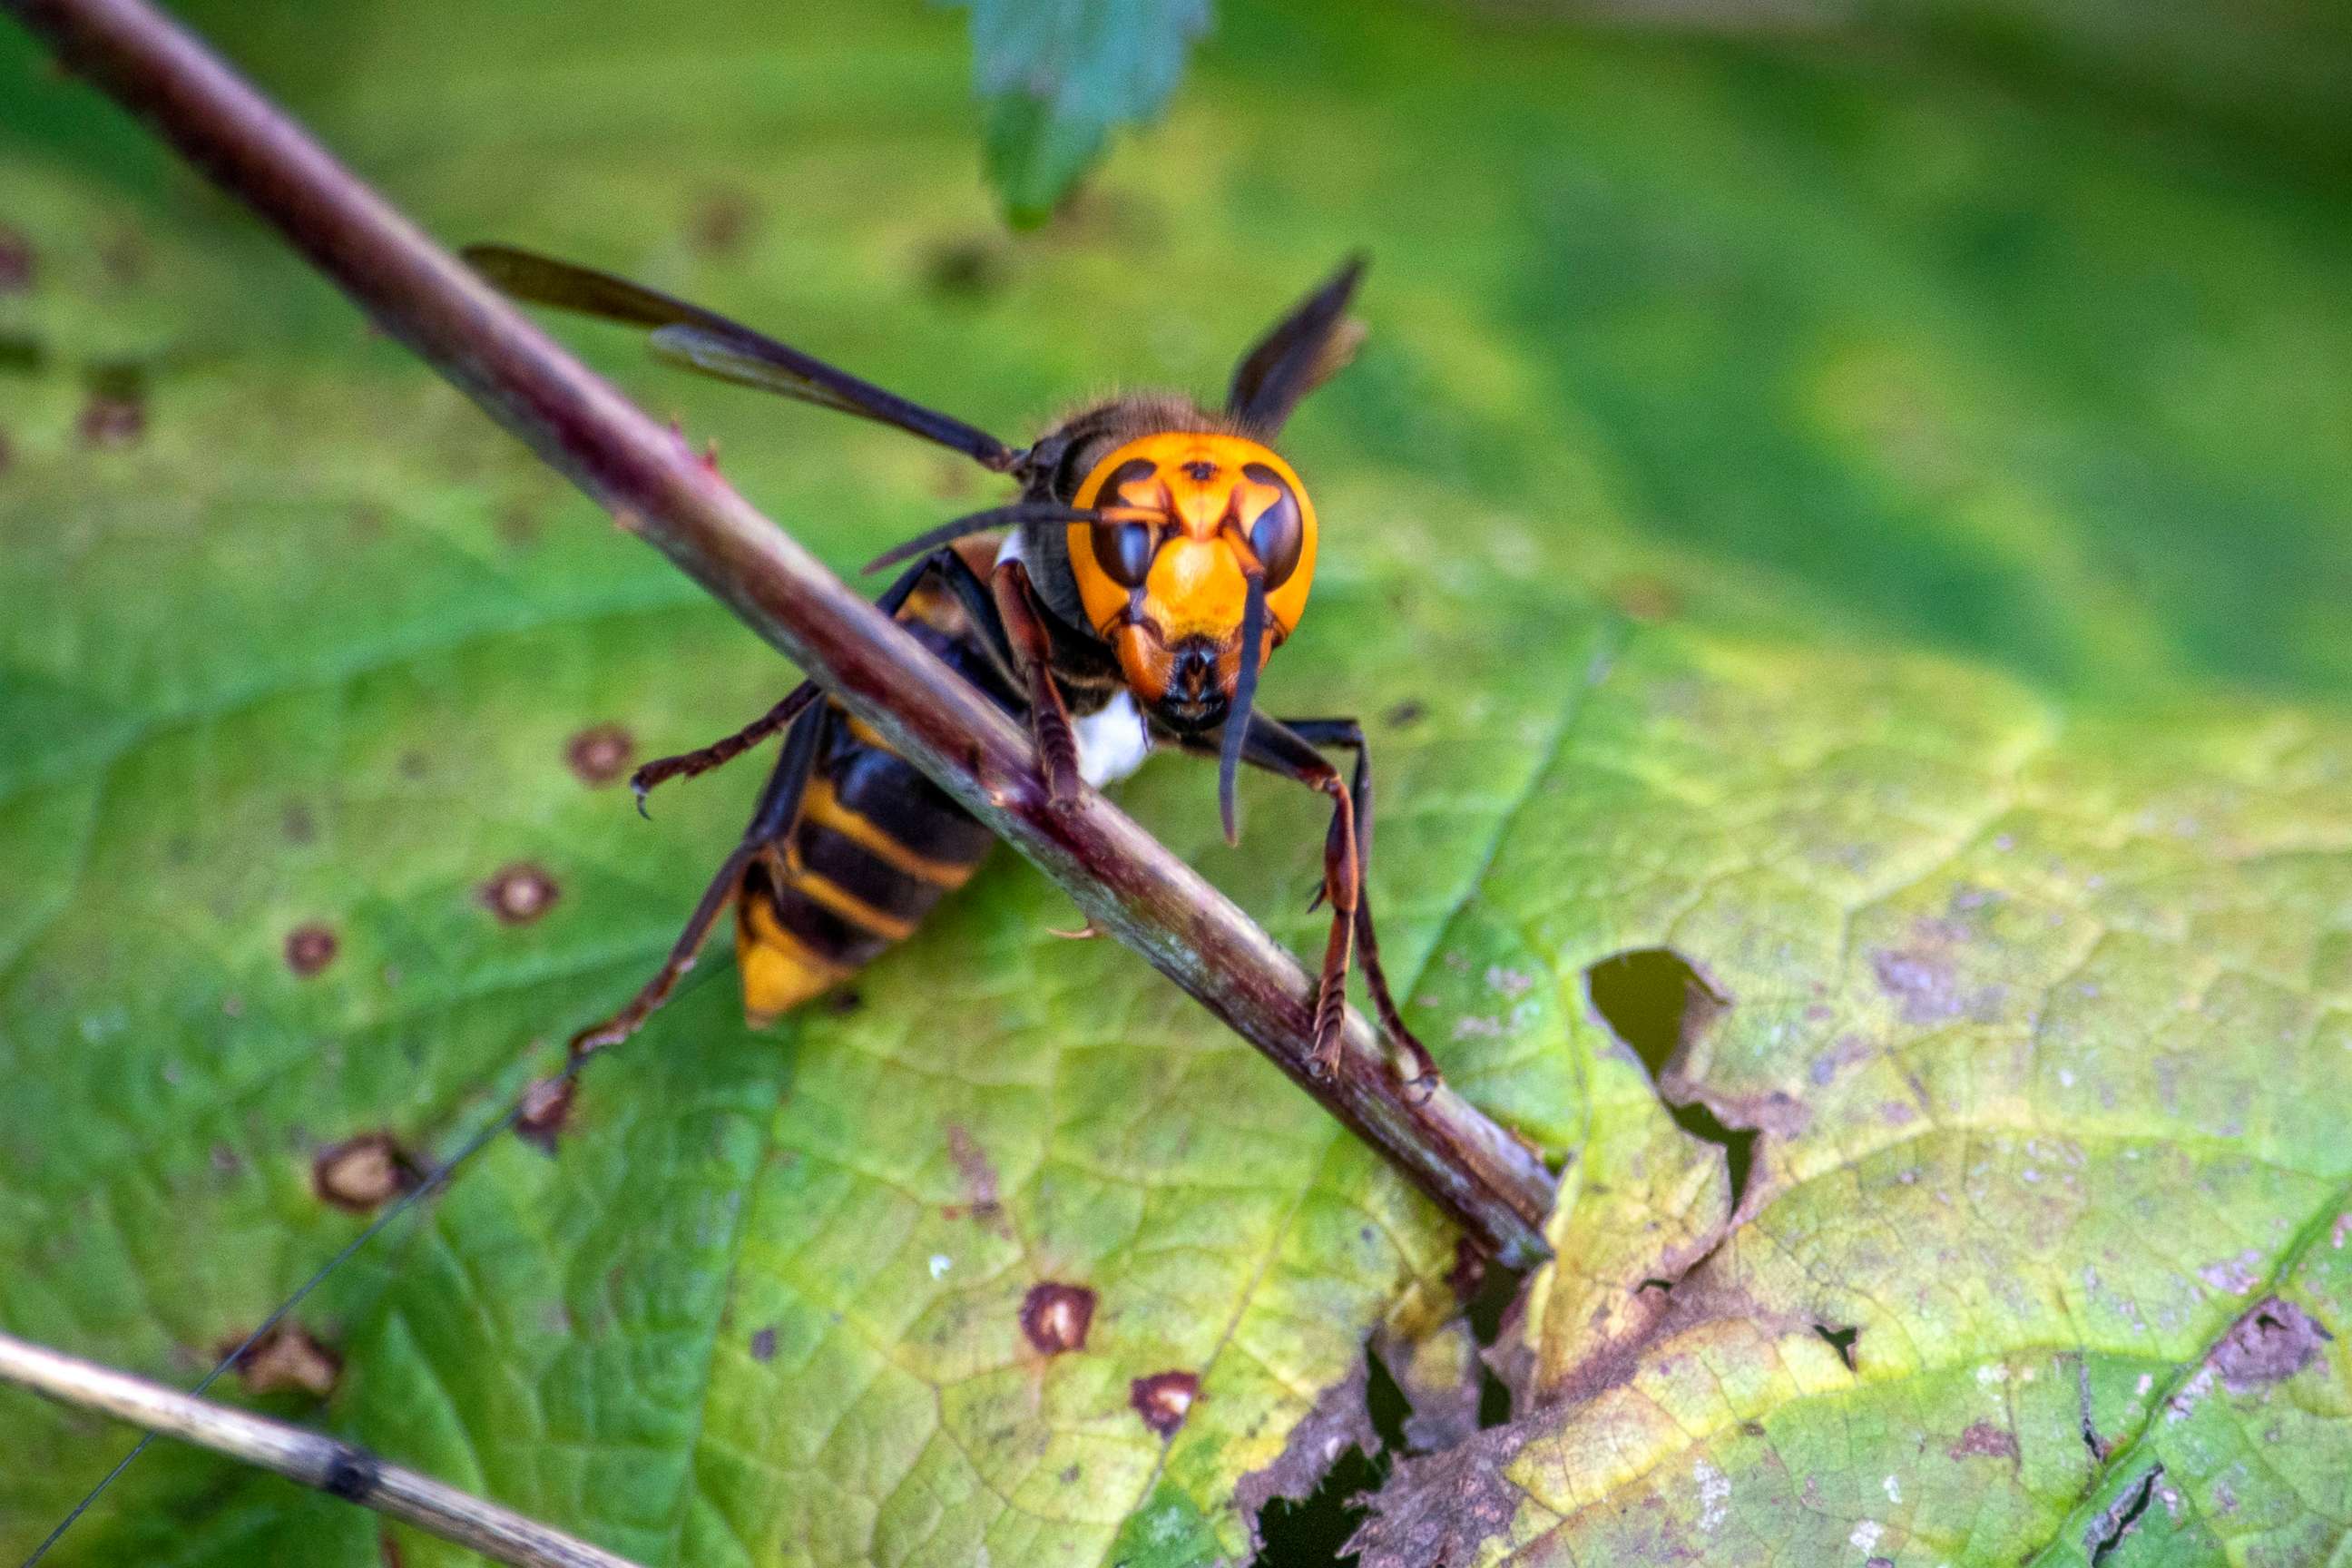 PHOTO: In this Oct. 22, 2020, file photo provided by the Washington State Dept. of Agriculture, an Asian Giant Hornet wearing a tracking device is shown near Blaine, Wash.